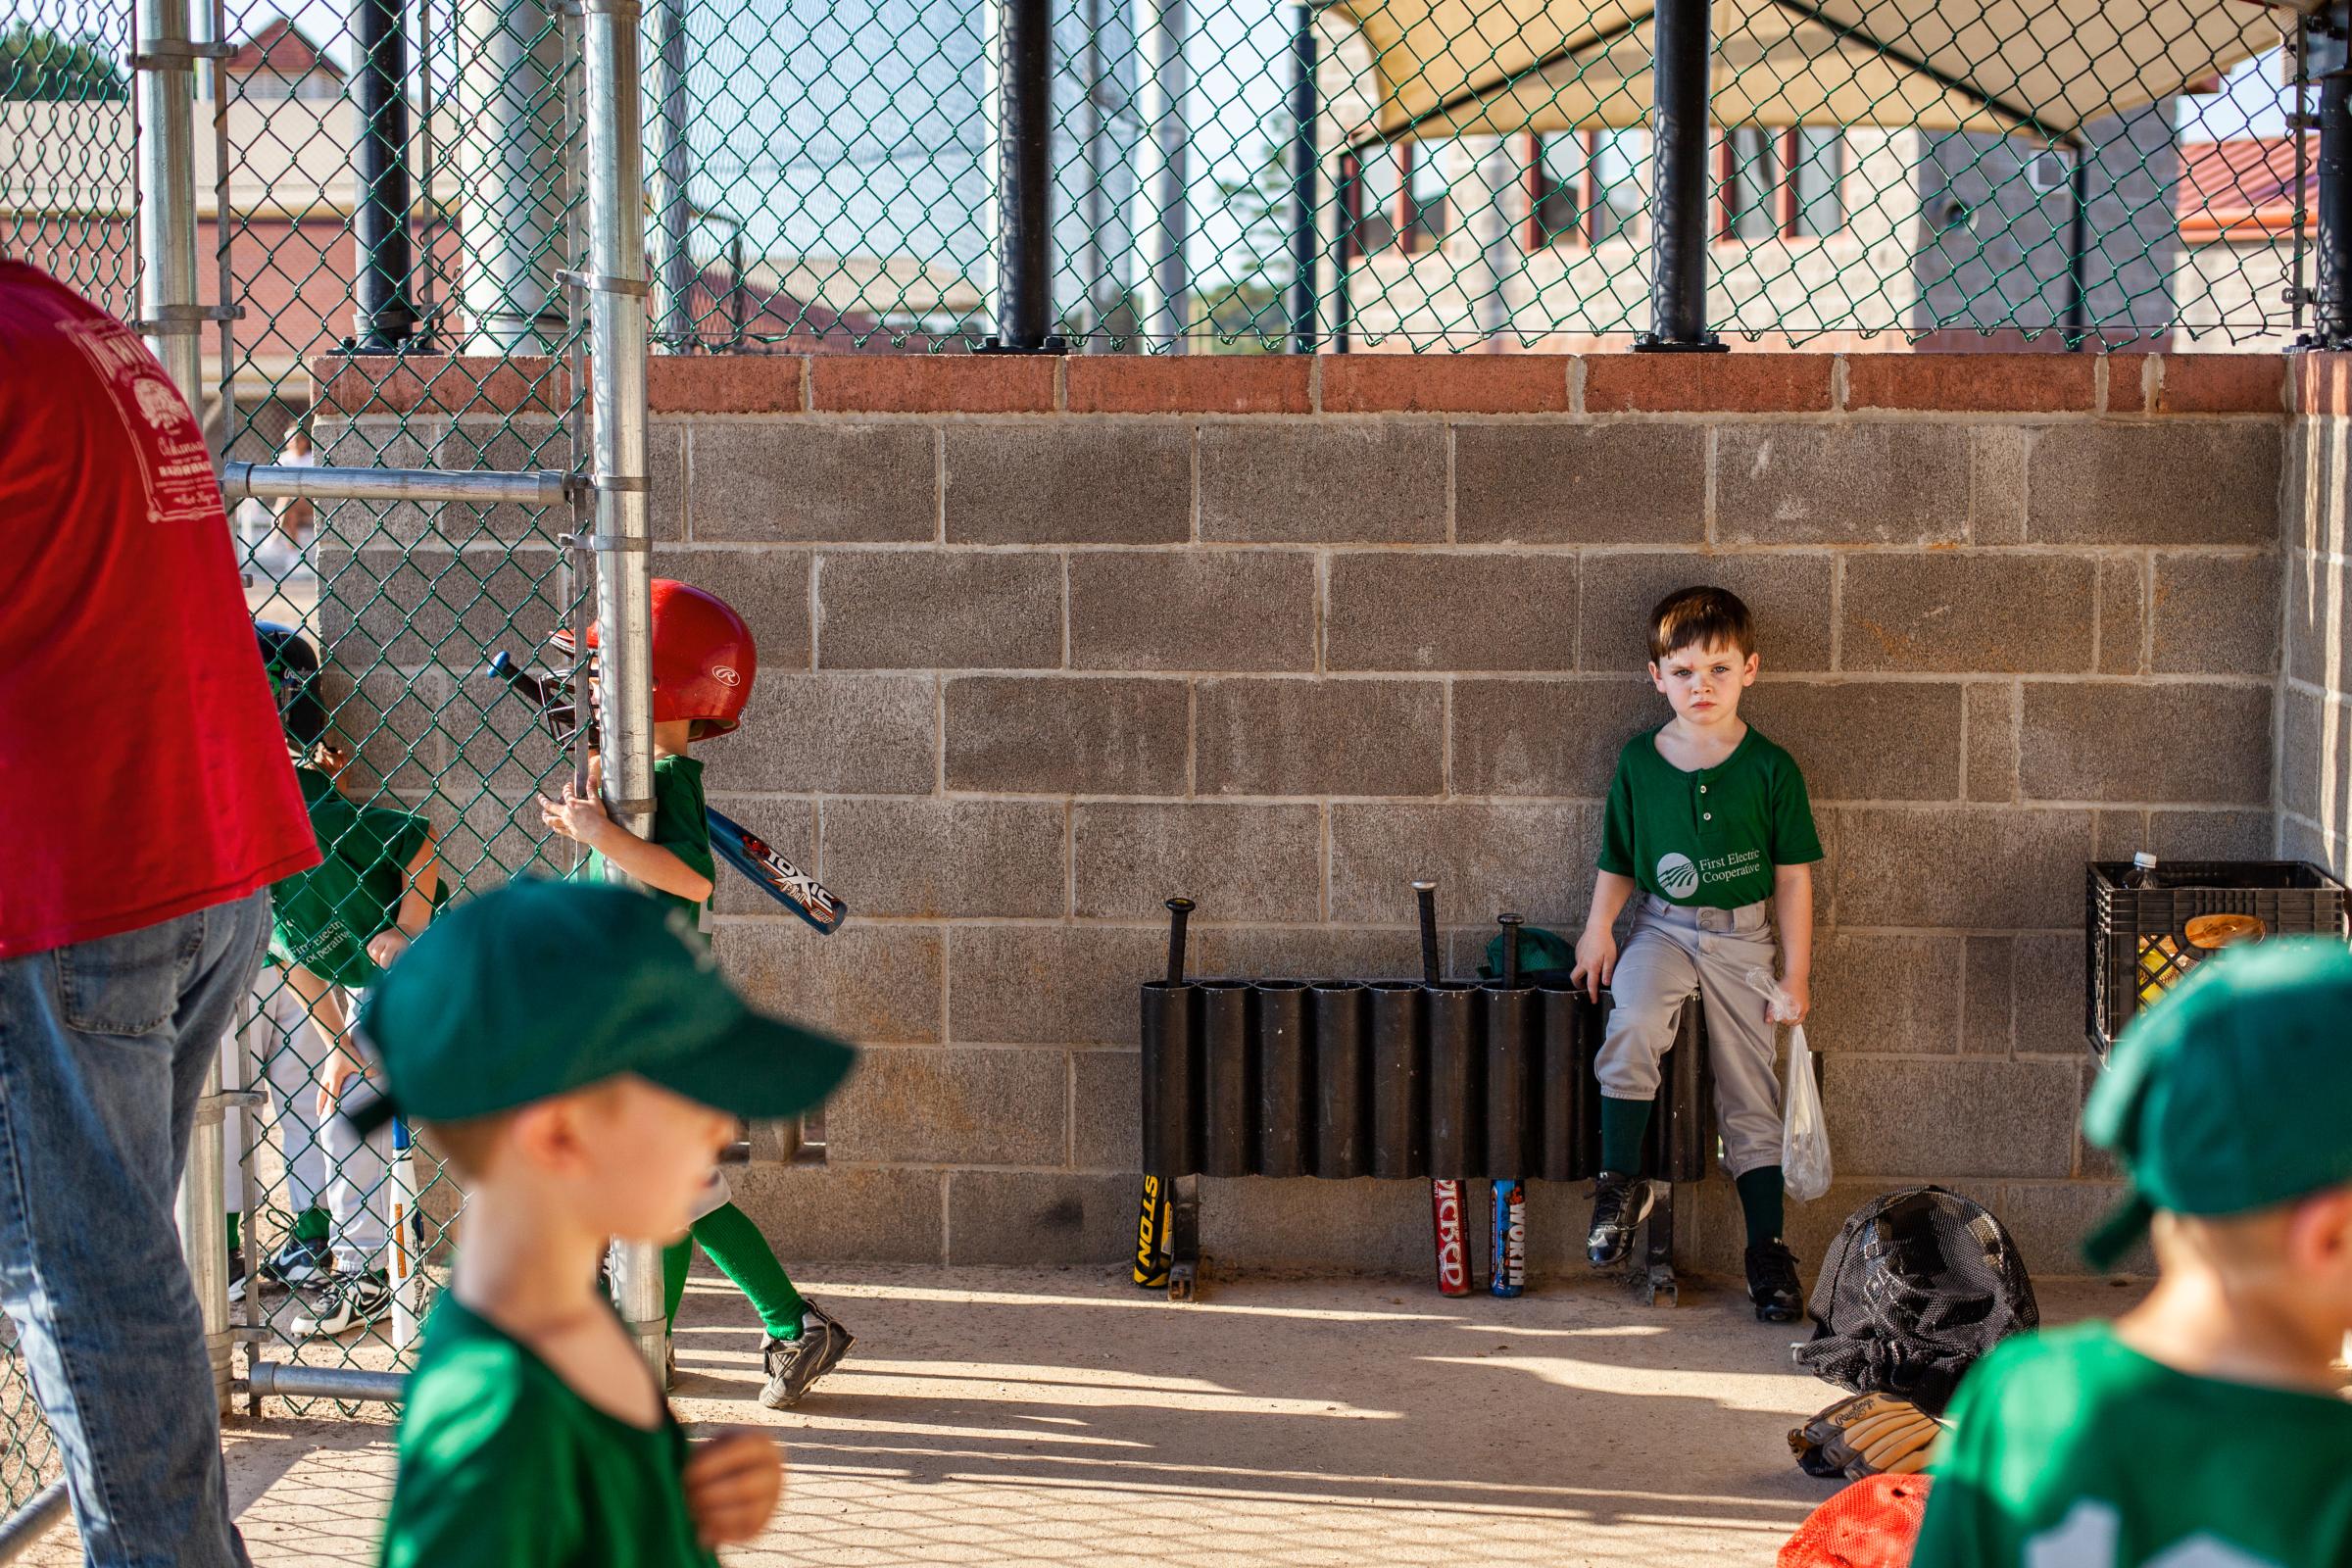 Growing Up - "There's no crying in baseball." A young...